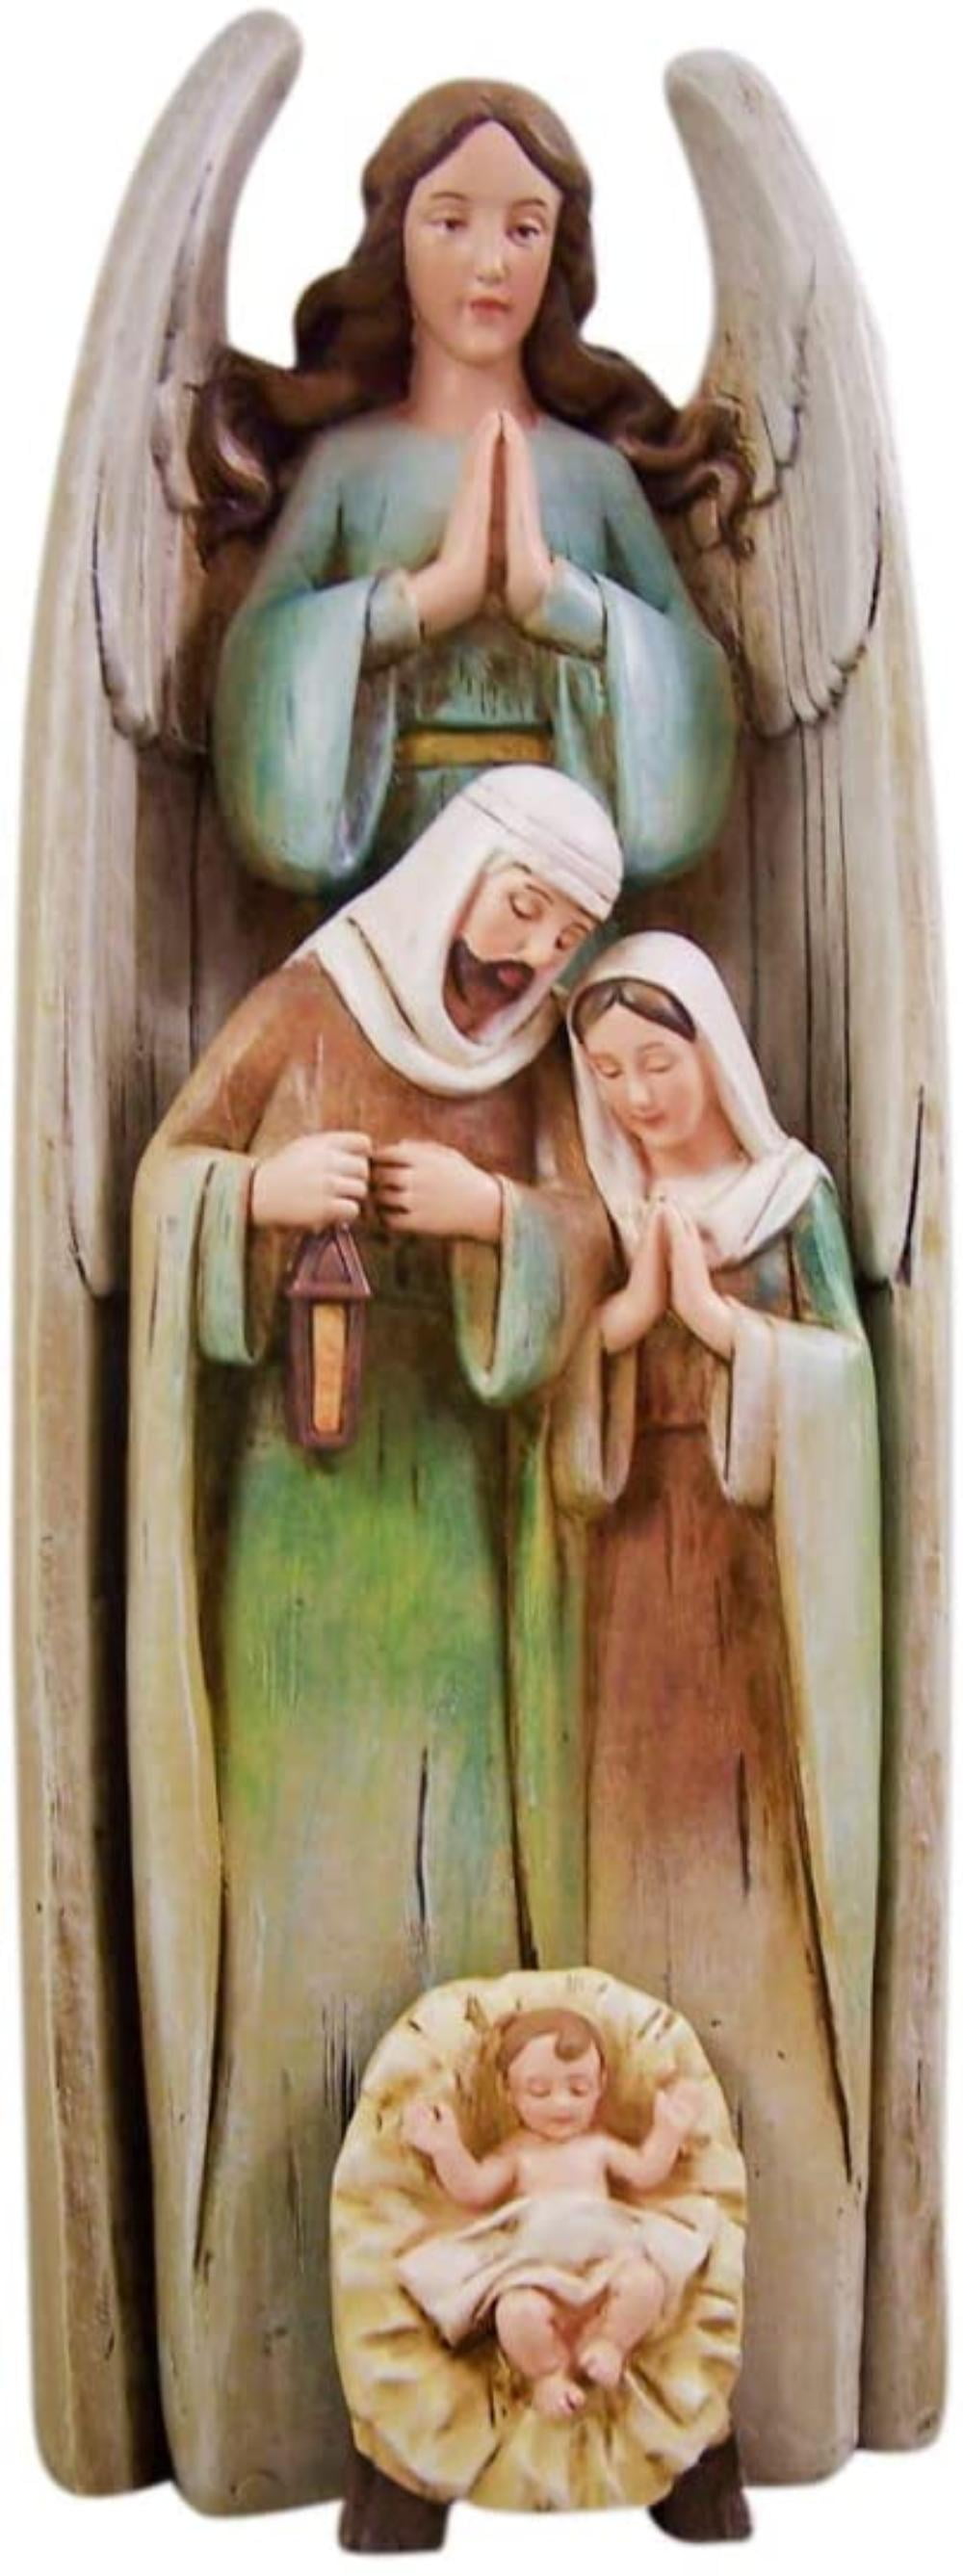 13 Inch Avalon Gallery Angels in Adoration Resin Christmas Nativity Figurine Statue